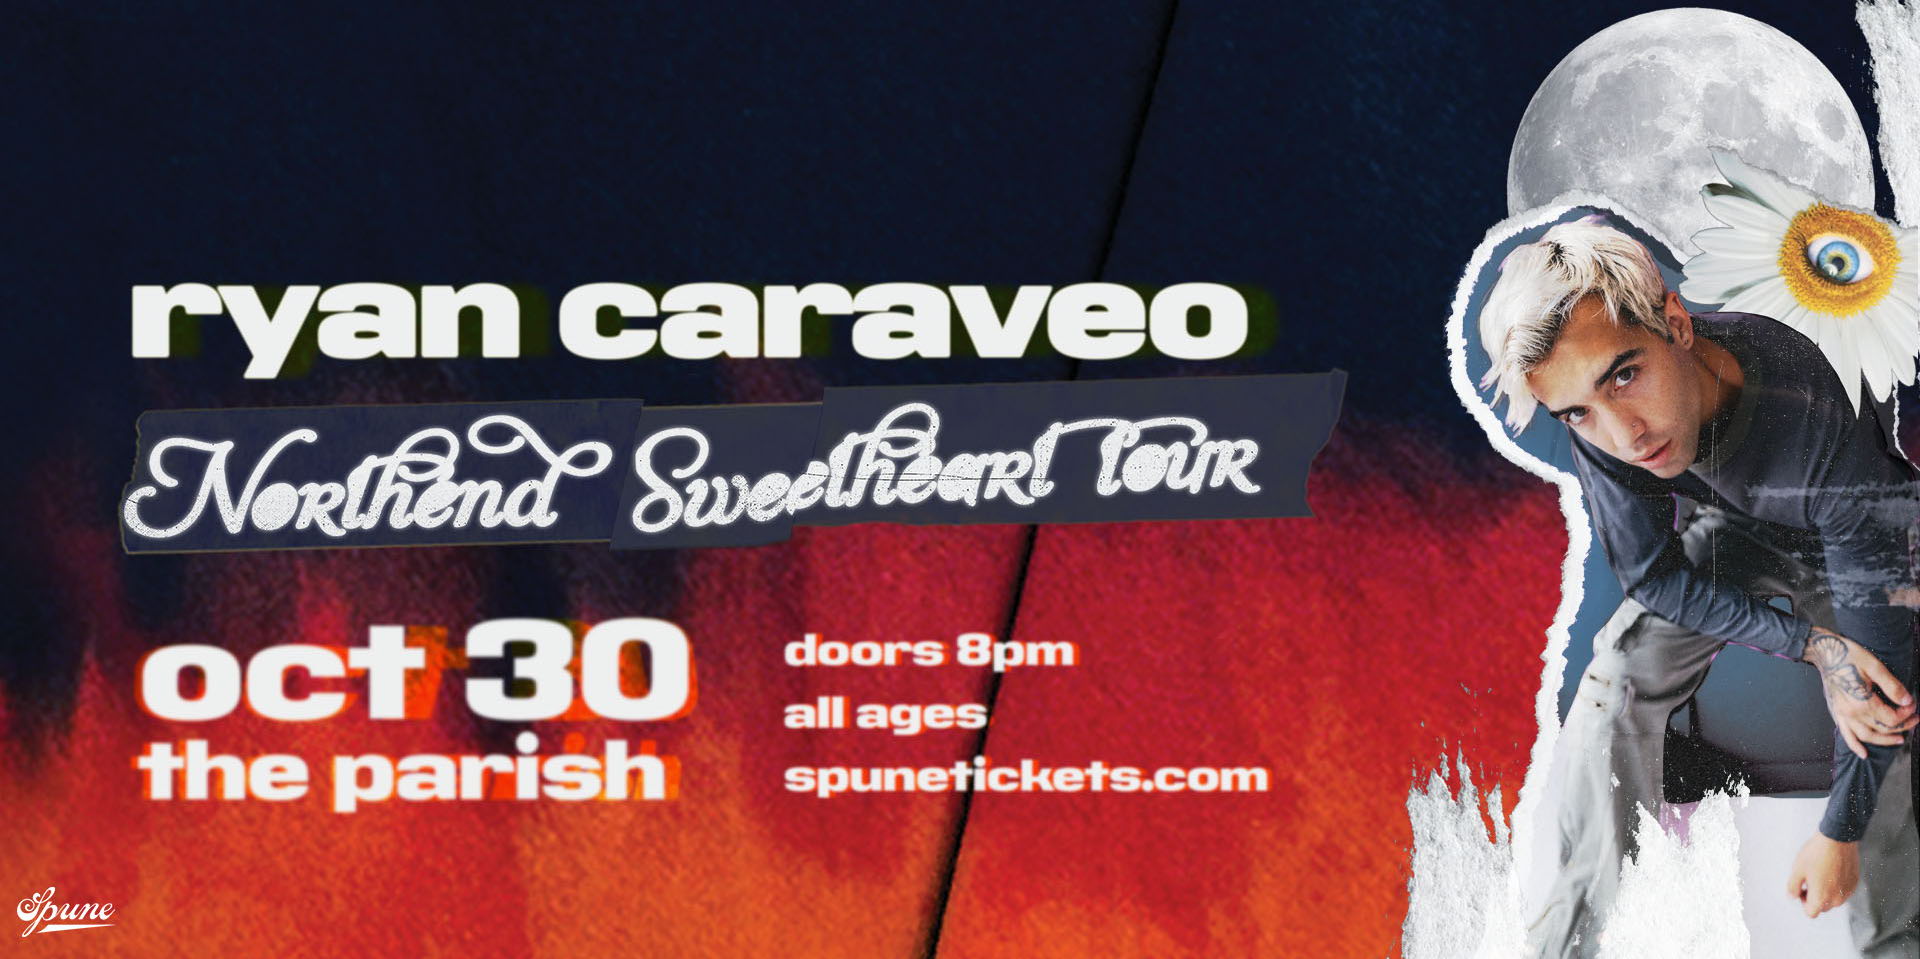 Ryan Caraveo: The Northend Sweetheart Tour promotional image